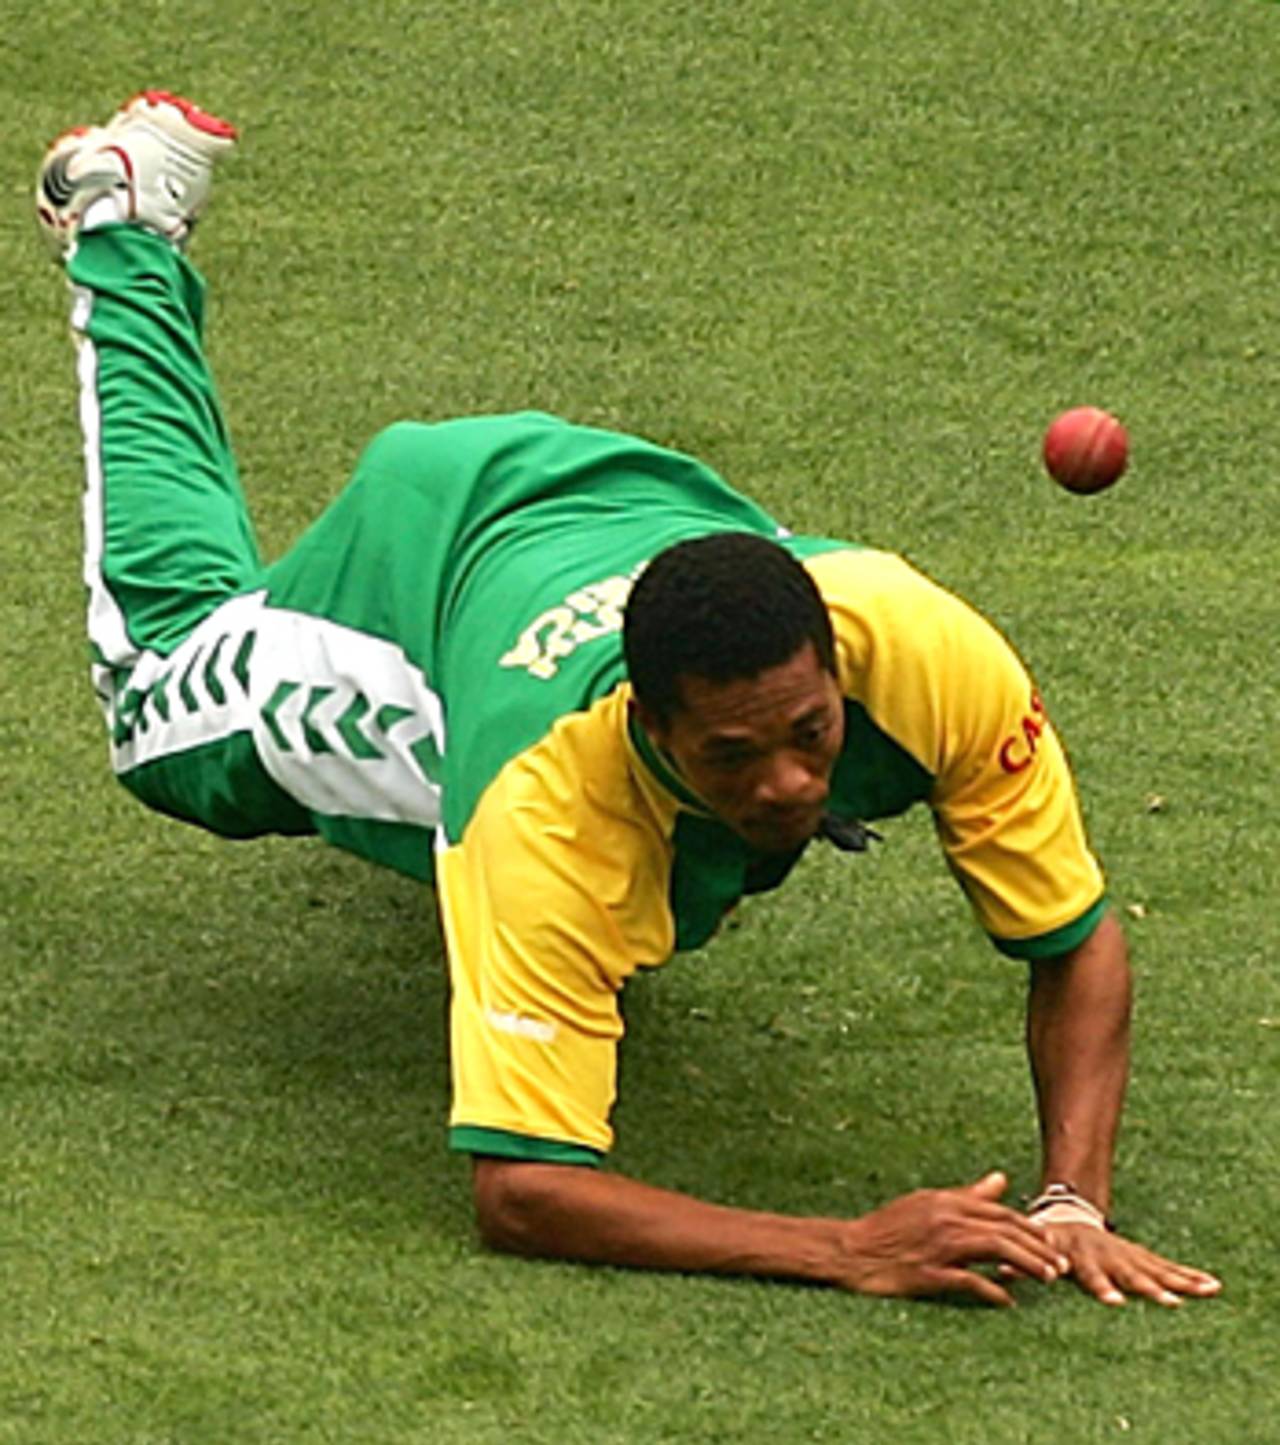 Makhaya Ntini scrambles for the ball, Melbourne, December 23, 2005